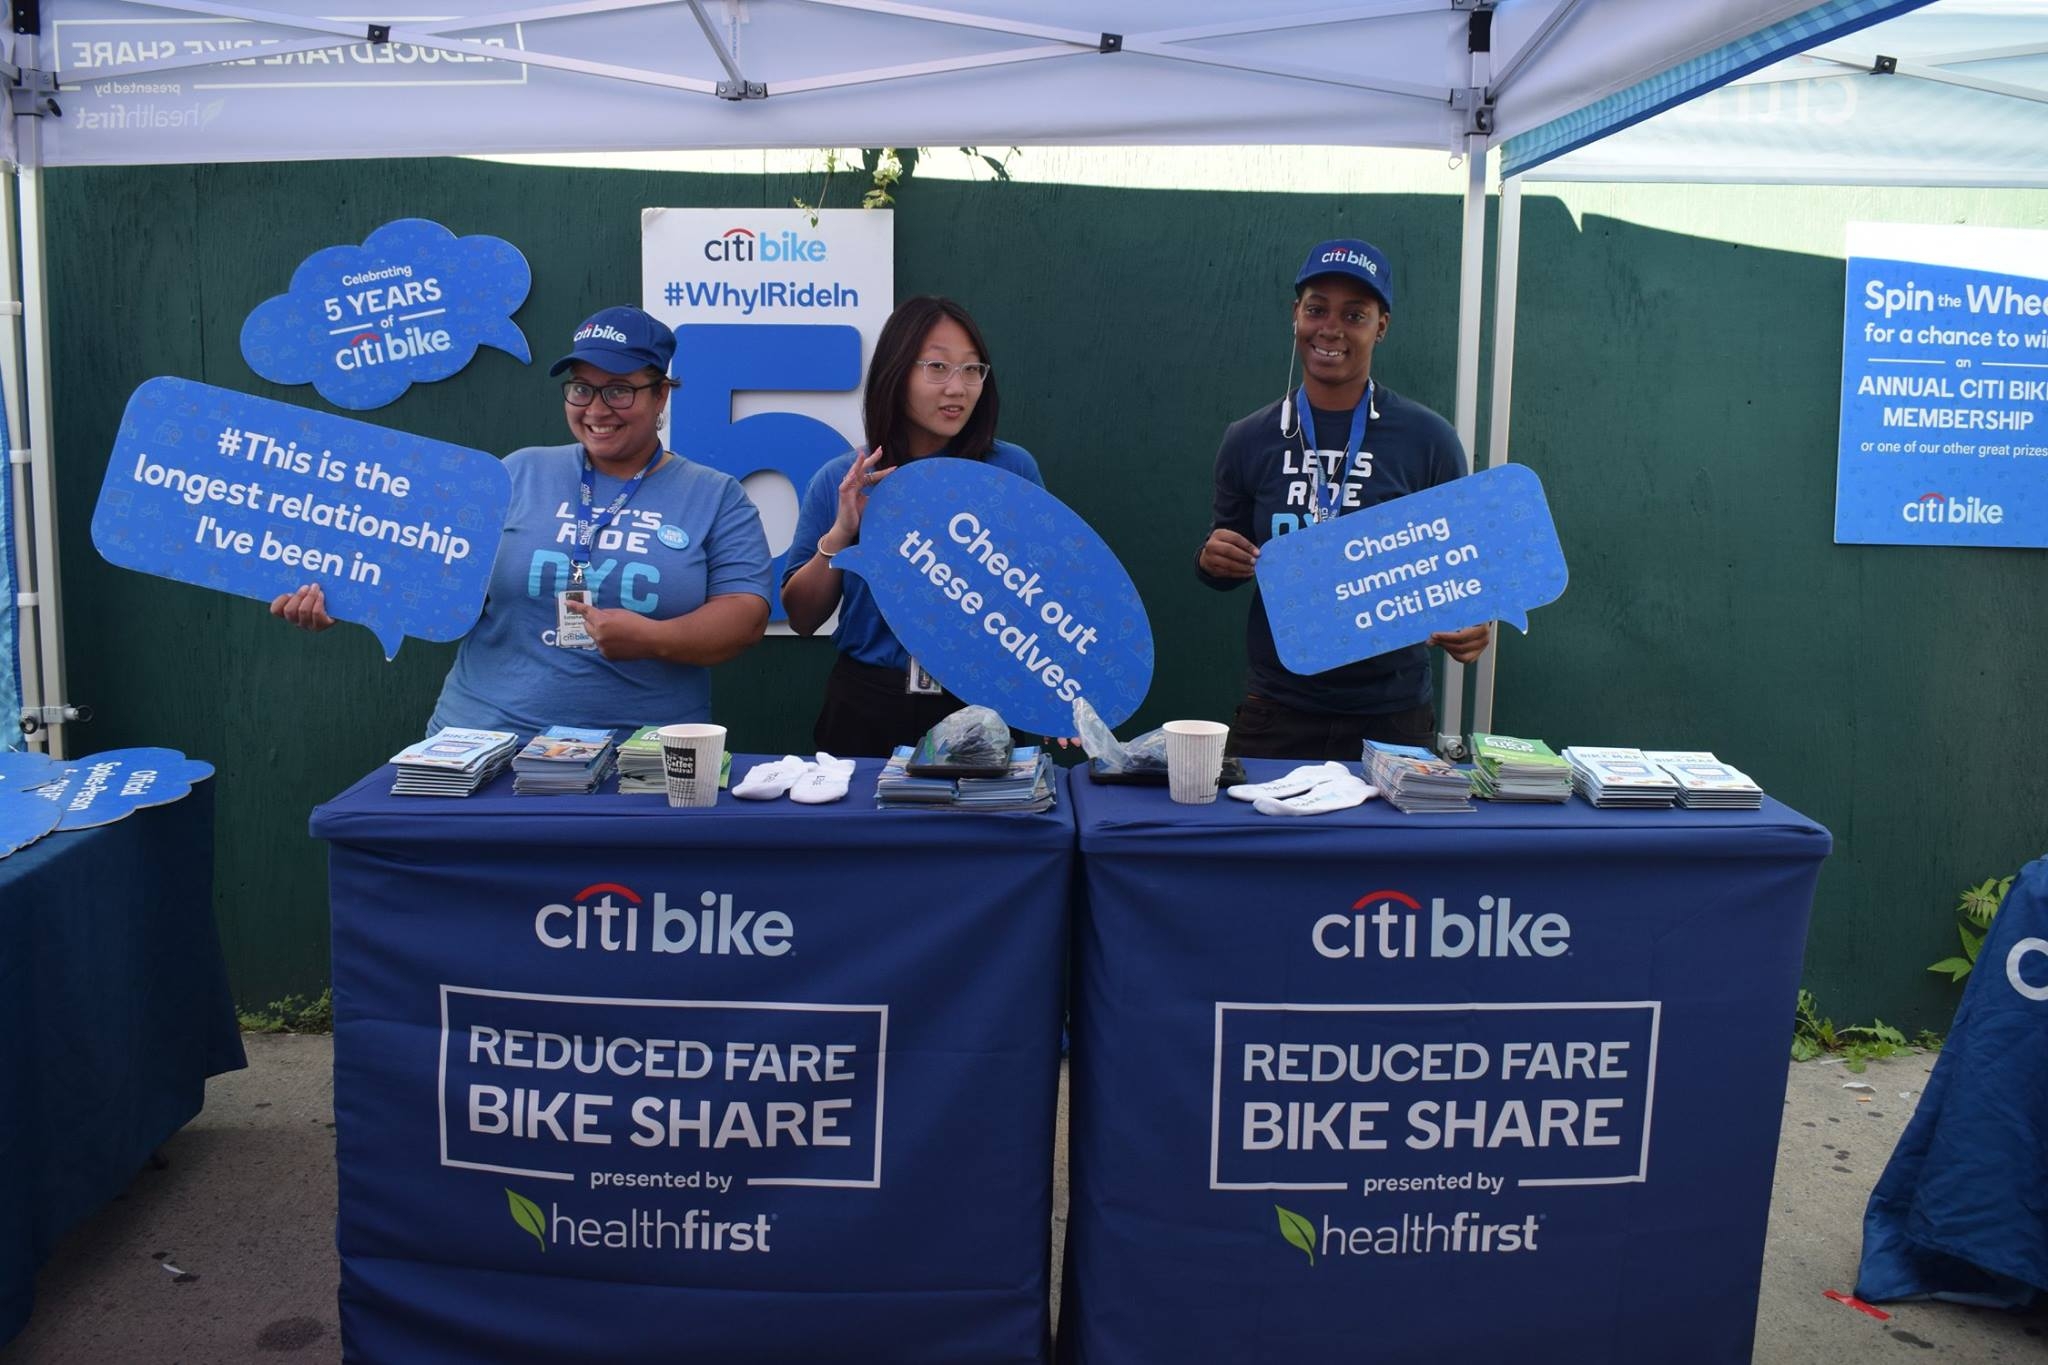 Citi Bike booth, with employees holding "speech bubbles" with phrases like "Check out these calves" and "Chasing summer on a Citi Bike". 